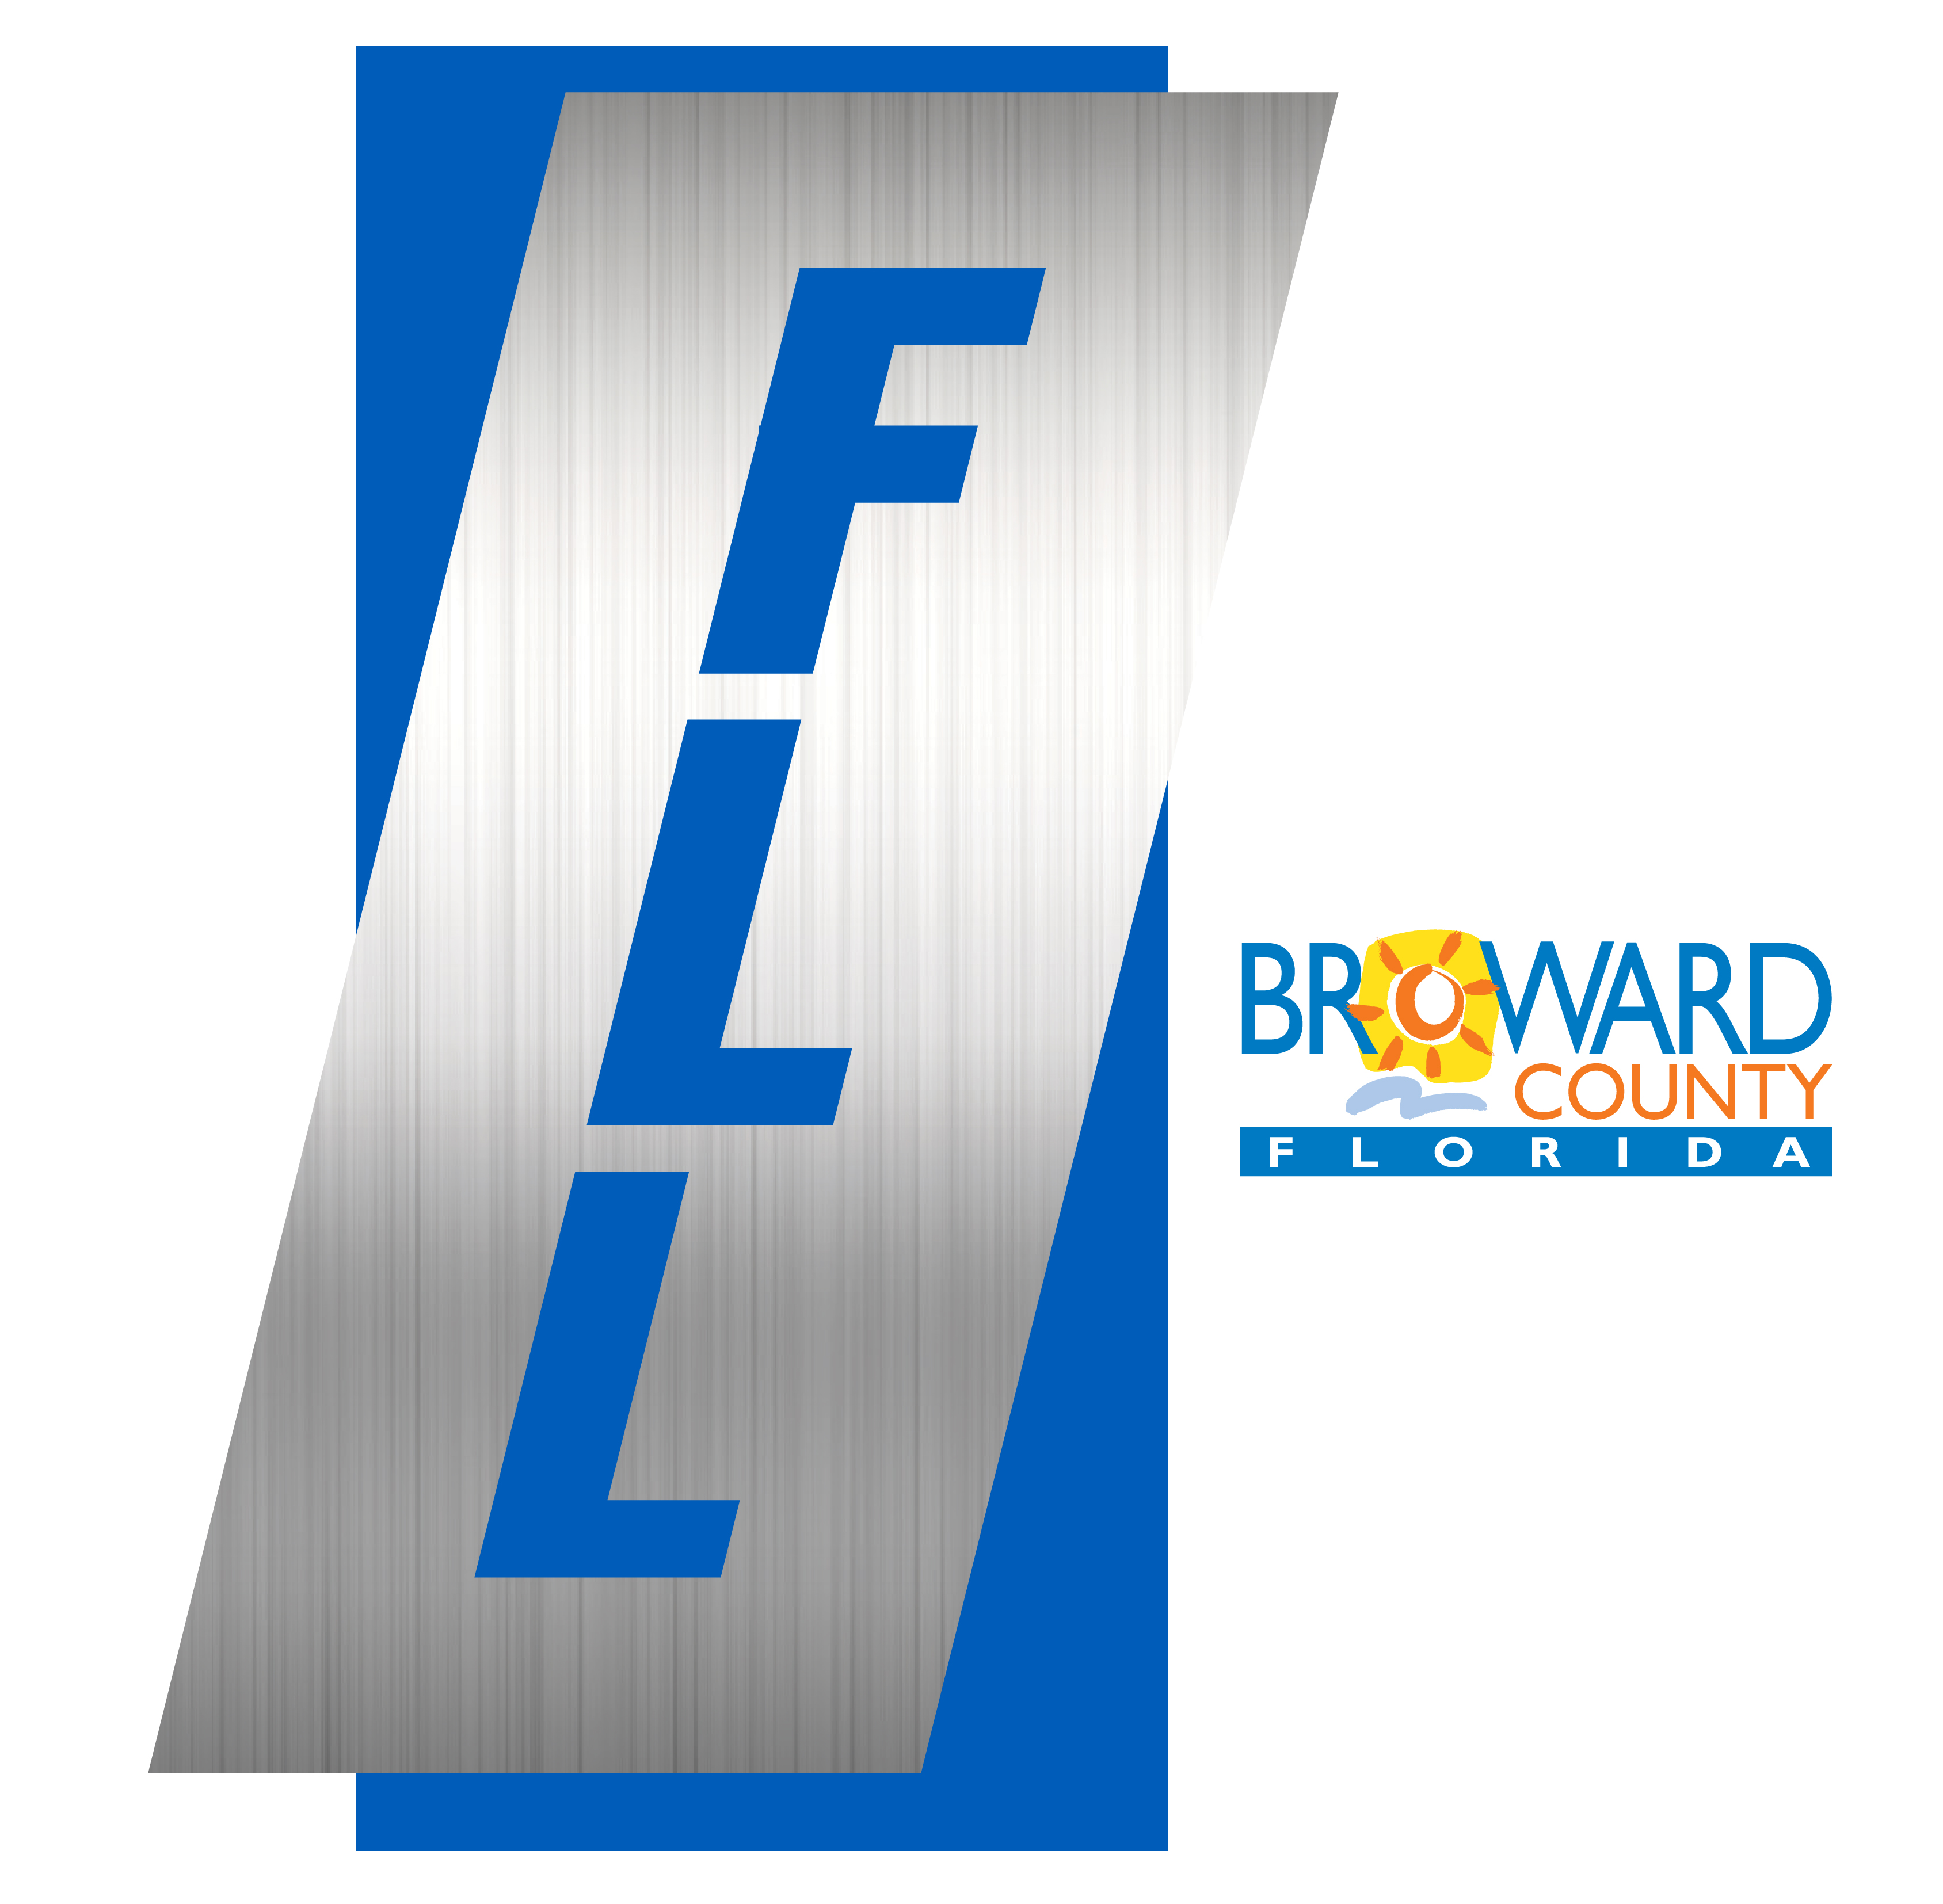 FLL_welcomesign_BRO-County-logo-01.png